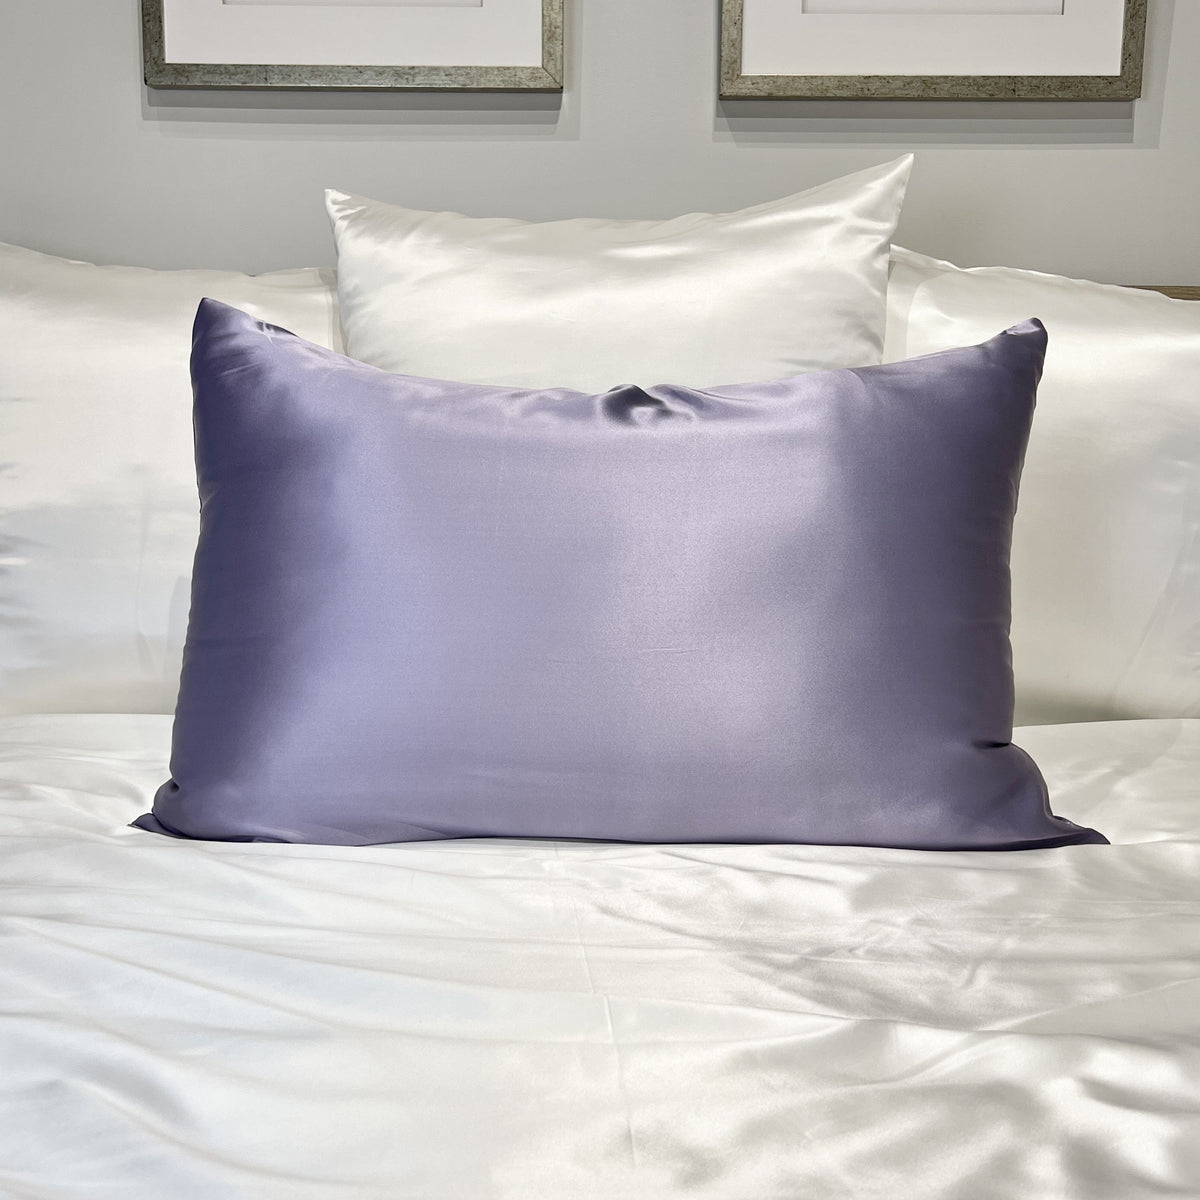 Mulberry Park Silks Luxury 19 Momme Pure Silk Pillowcase - Lilac